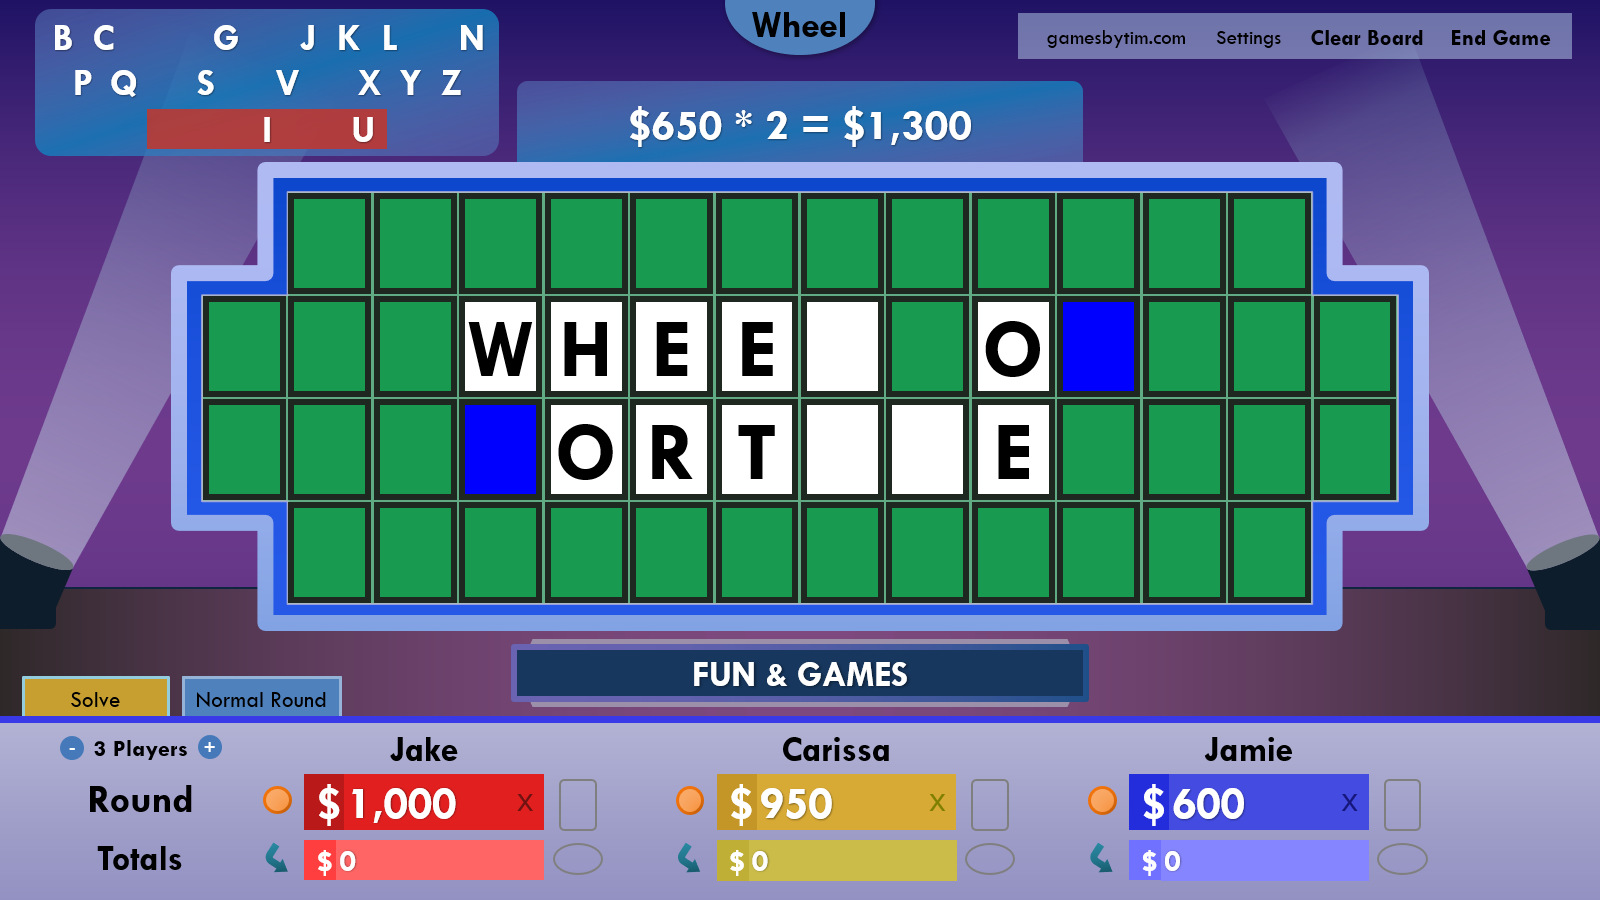 games - Wheel of Fortune for PowerPoint - Games by Tim - Game - Page 4 WoFPPTScreenshot